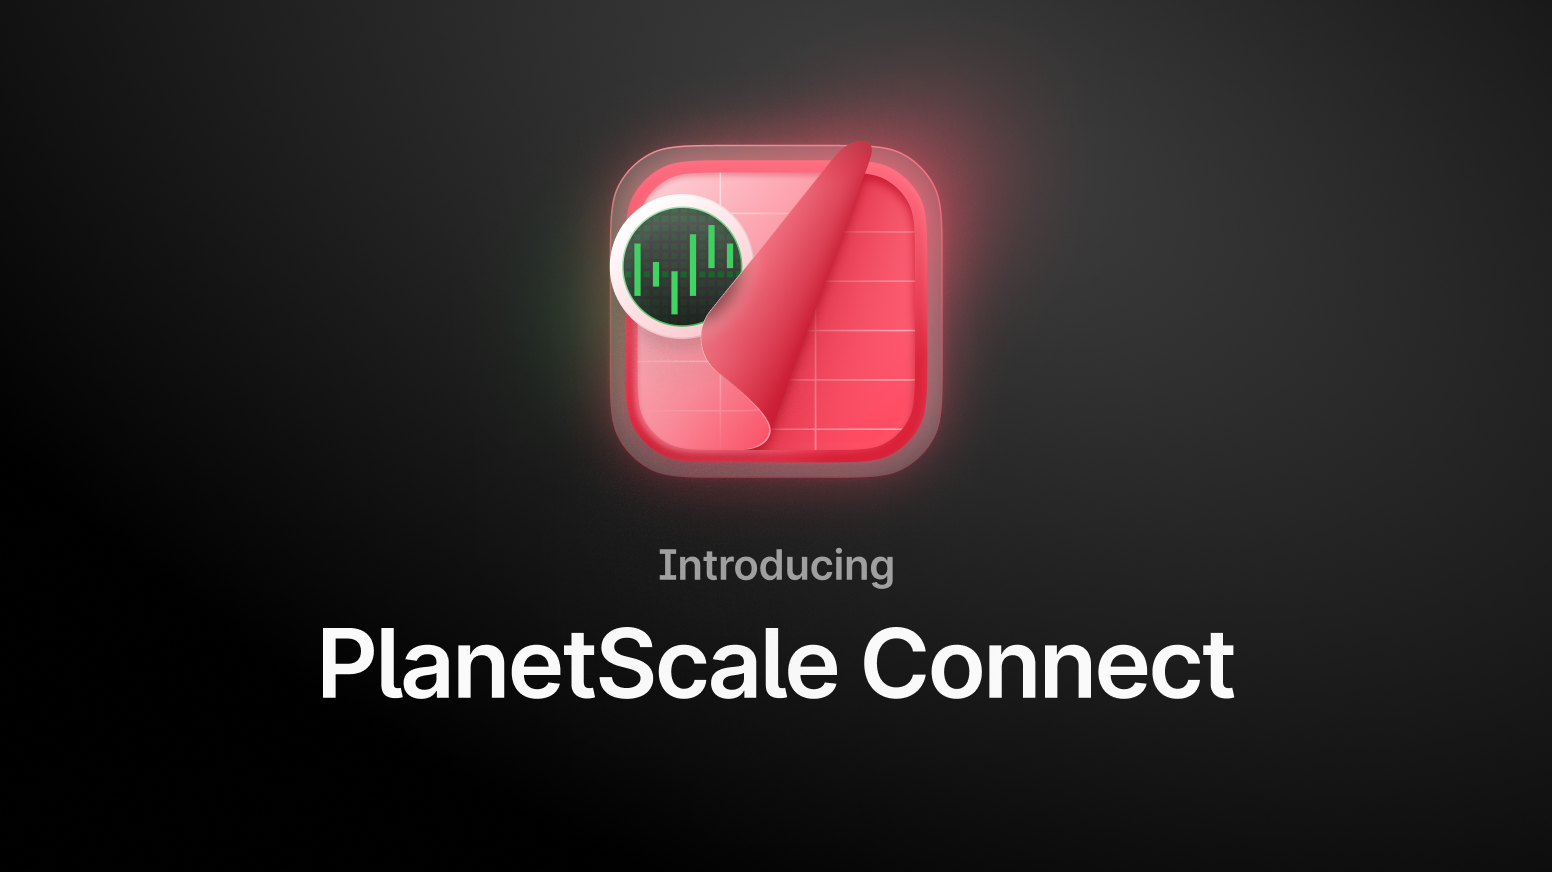 Extract, load, and transform your data with PlanetScale Connect